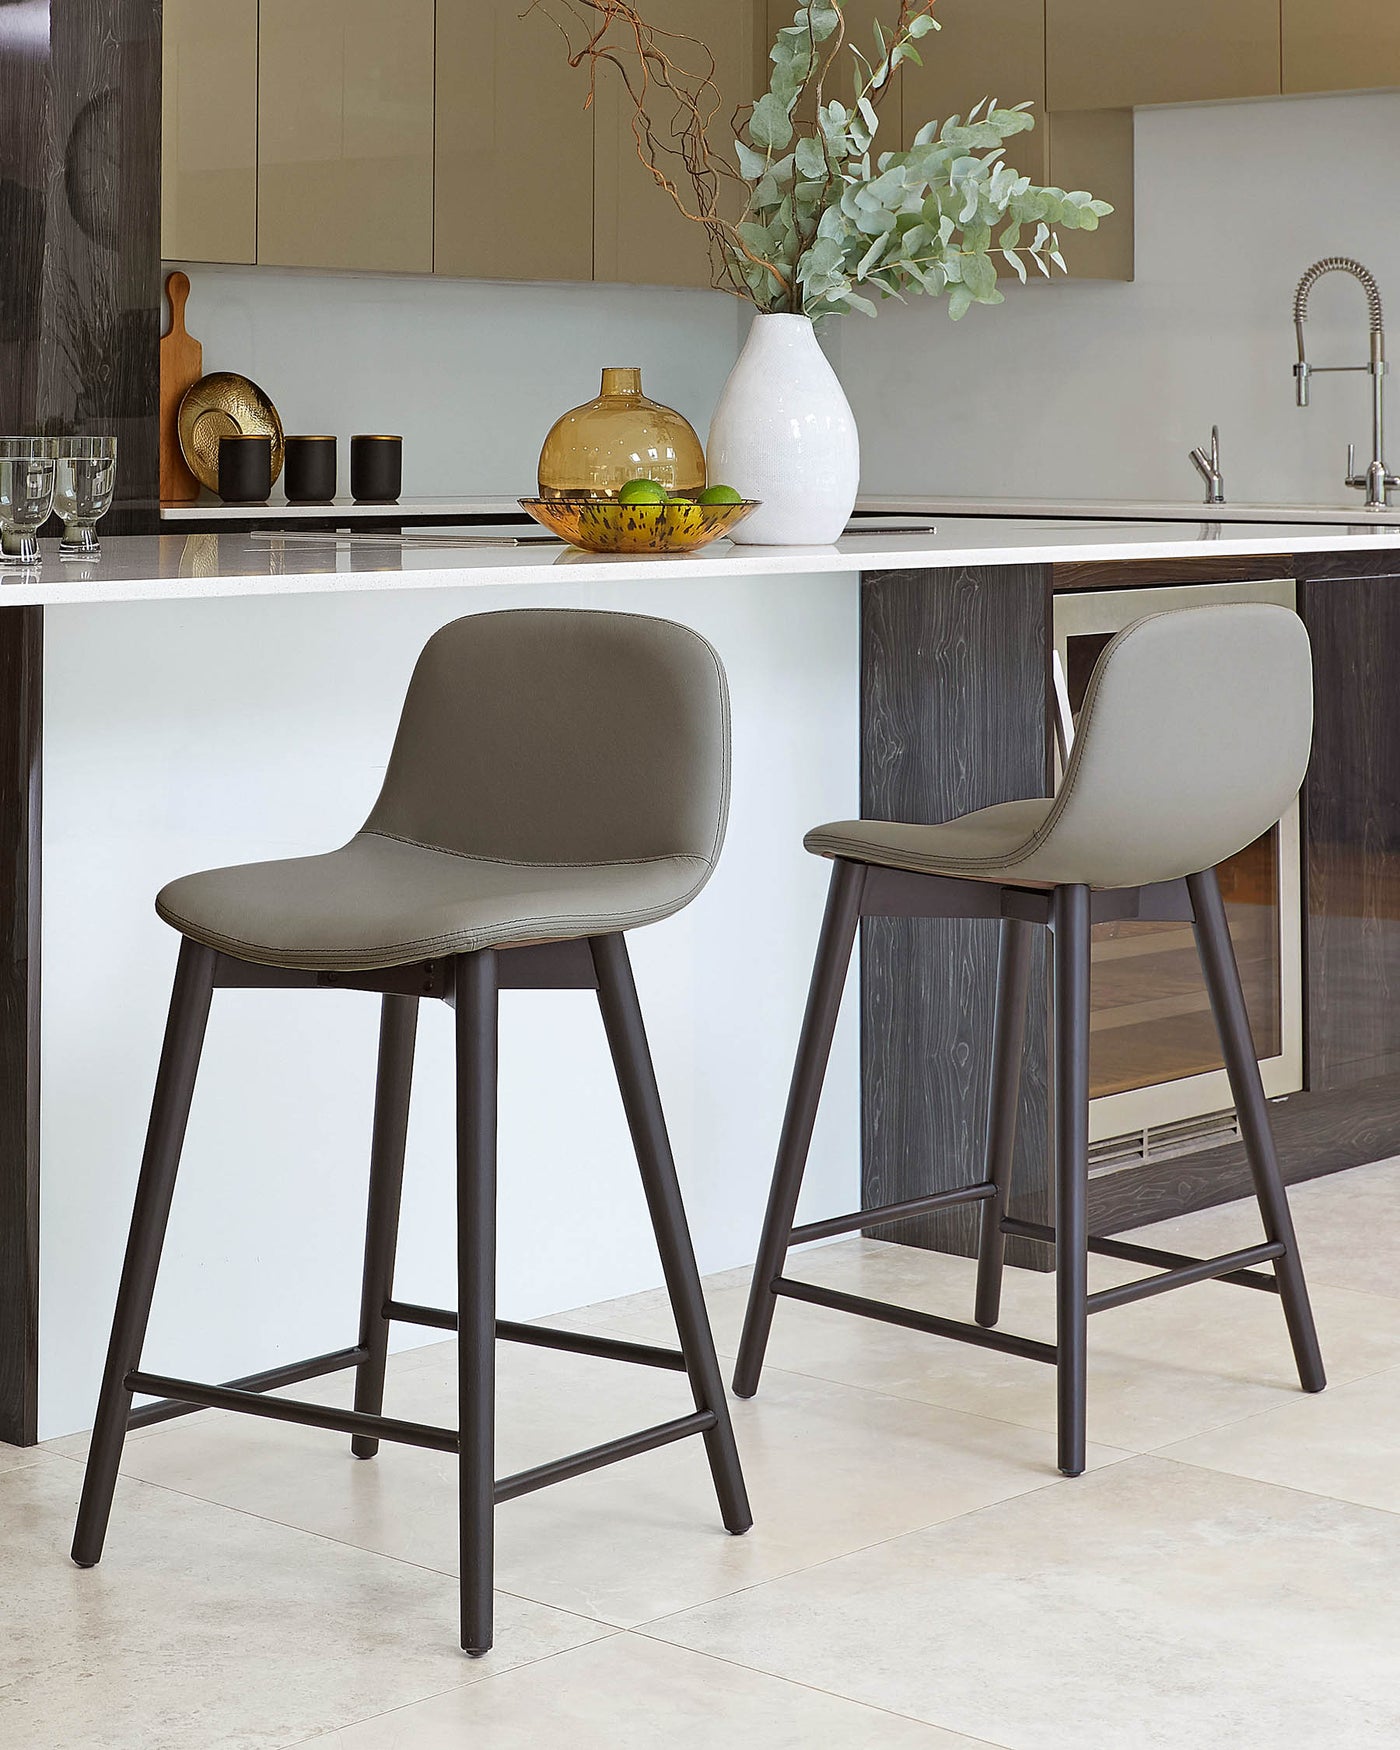 Modern minimalist bar stools with grey faux leather seating and black metal legs in a contemporary kitchen setting.